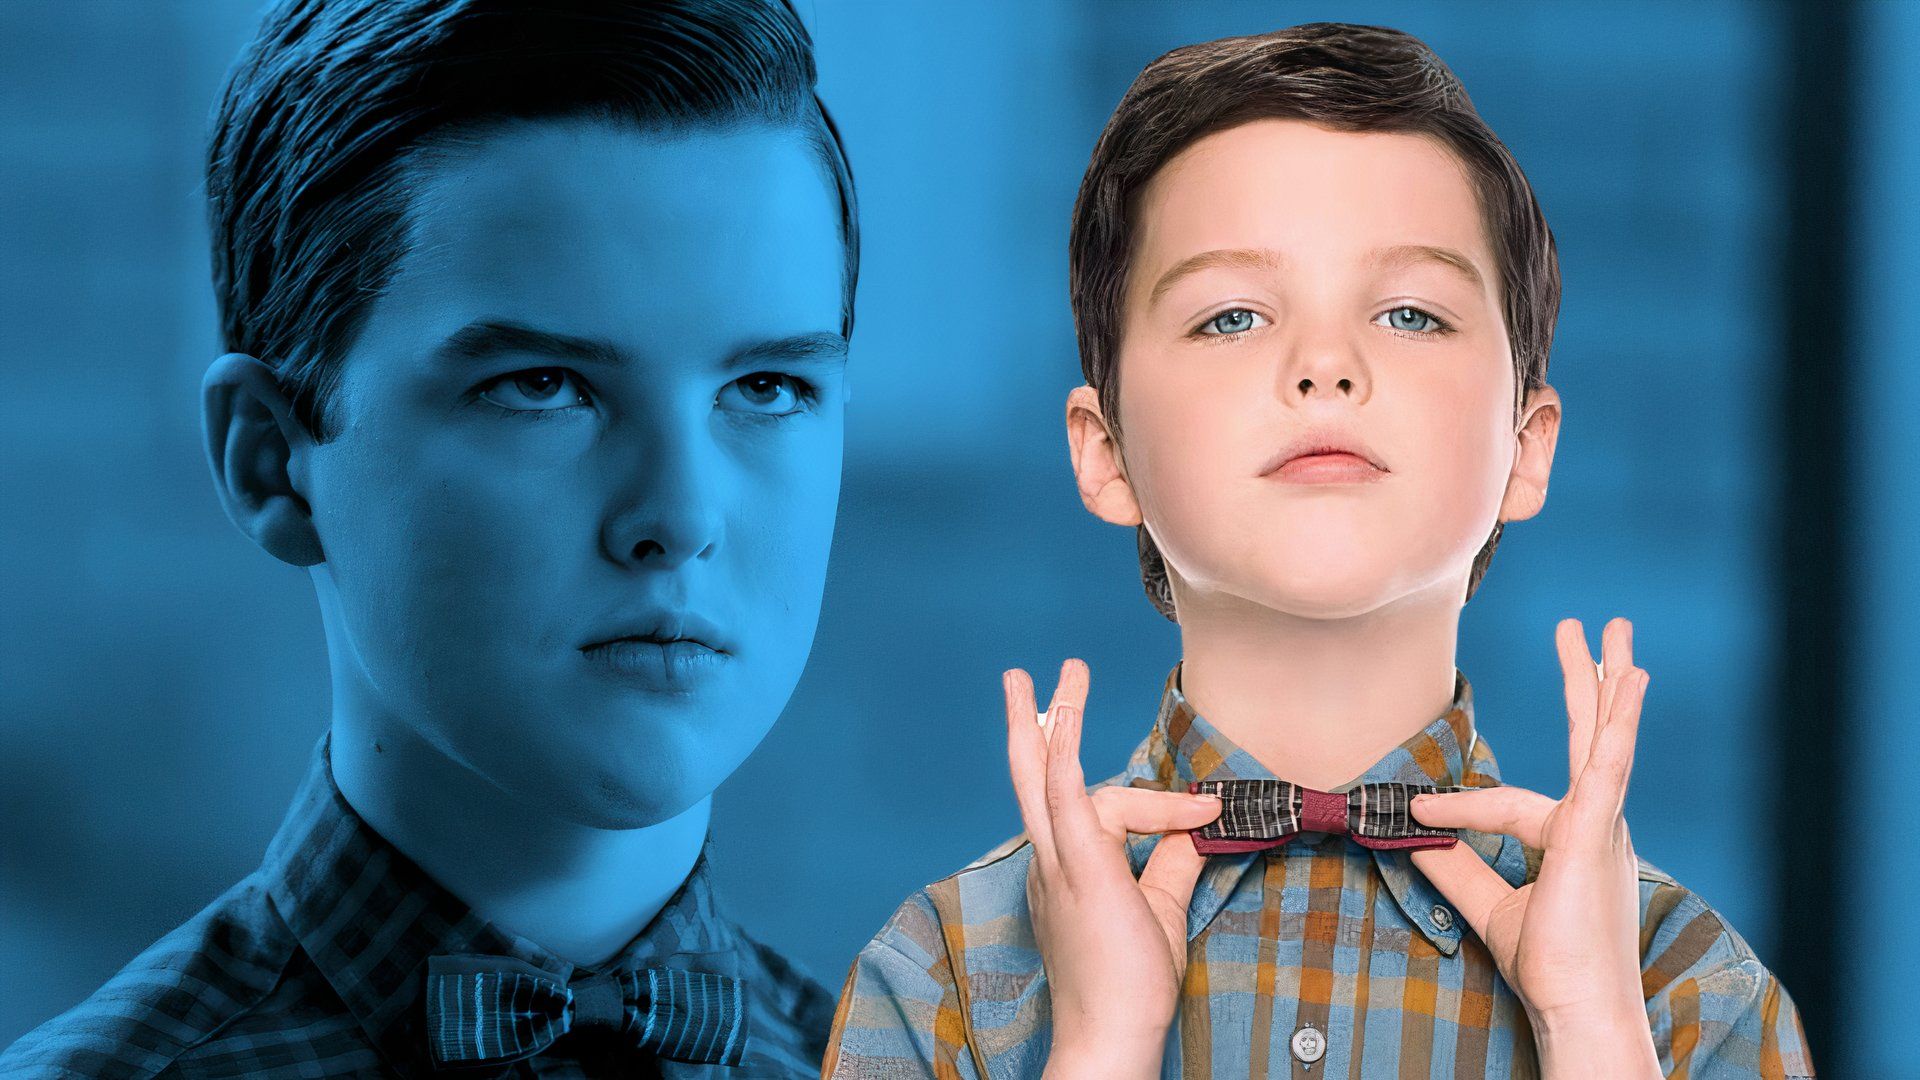 An edited image of Iain Armitage wearing a bowtie and collared shirt in Young Sheldon